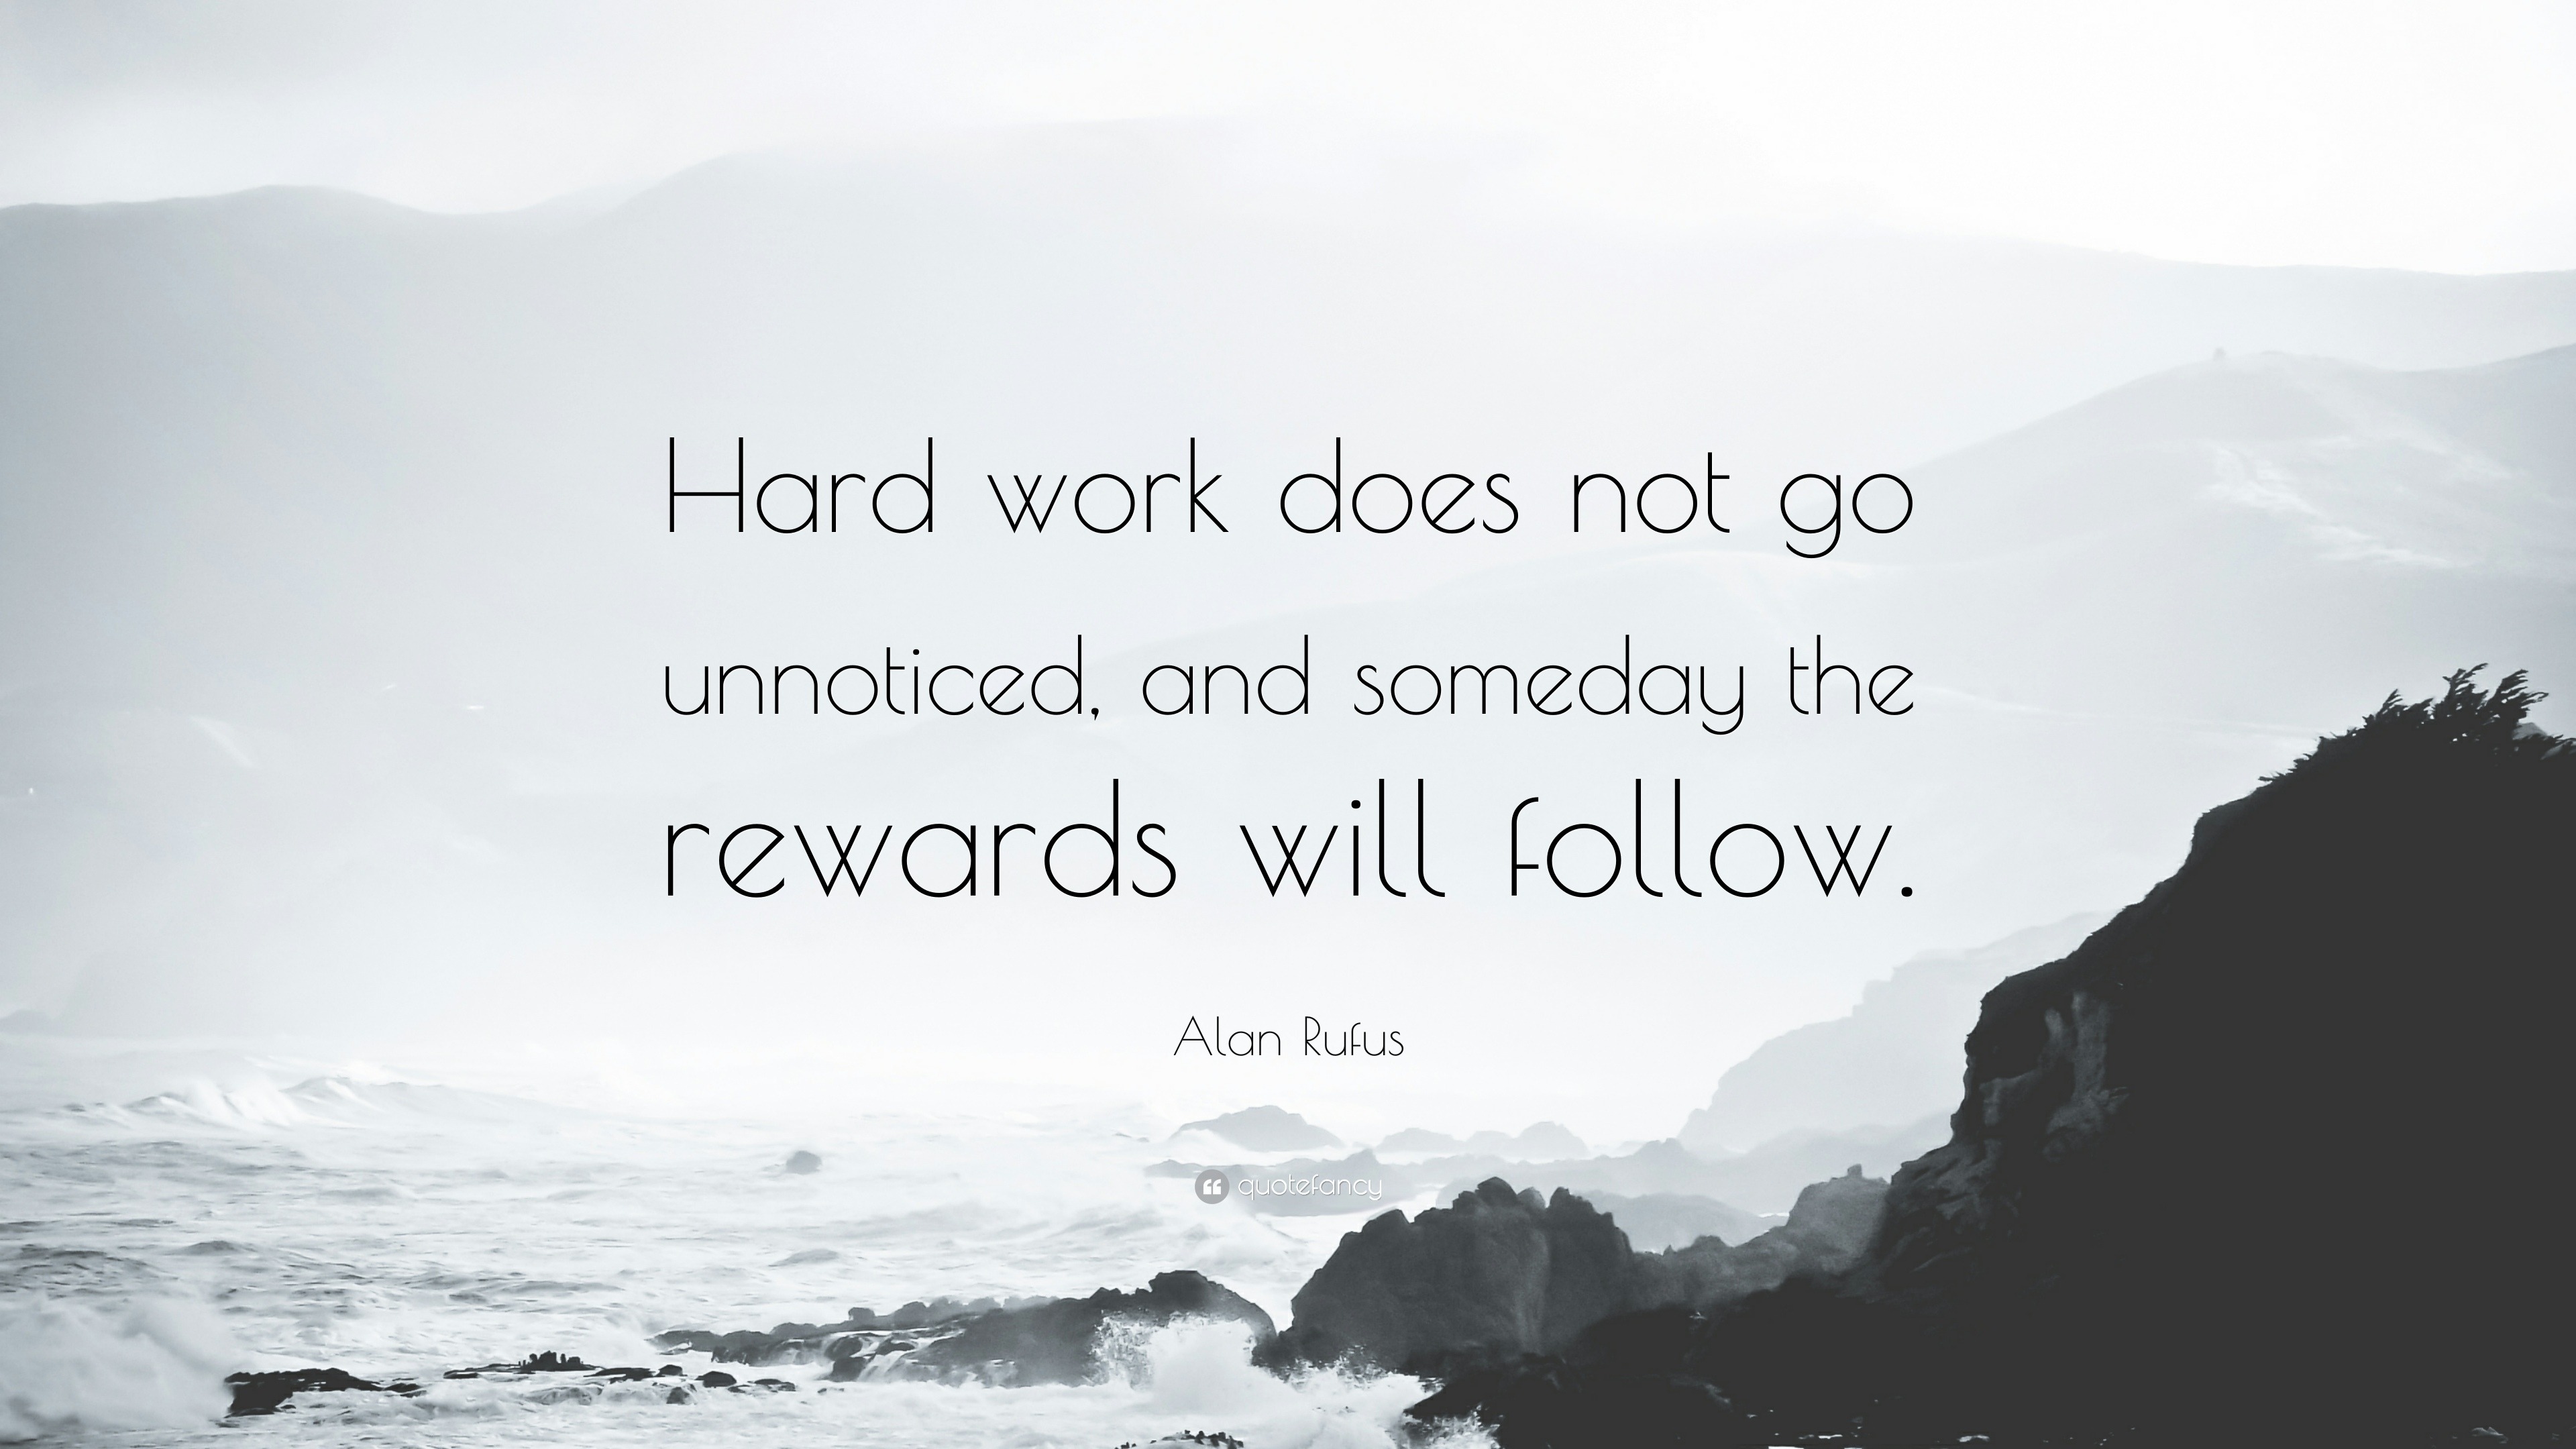 Alan Rufus Quote: “Hard work does not go unnoticed, and someday the rewards  will follow.”